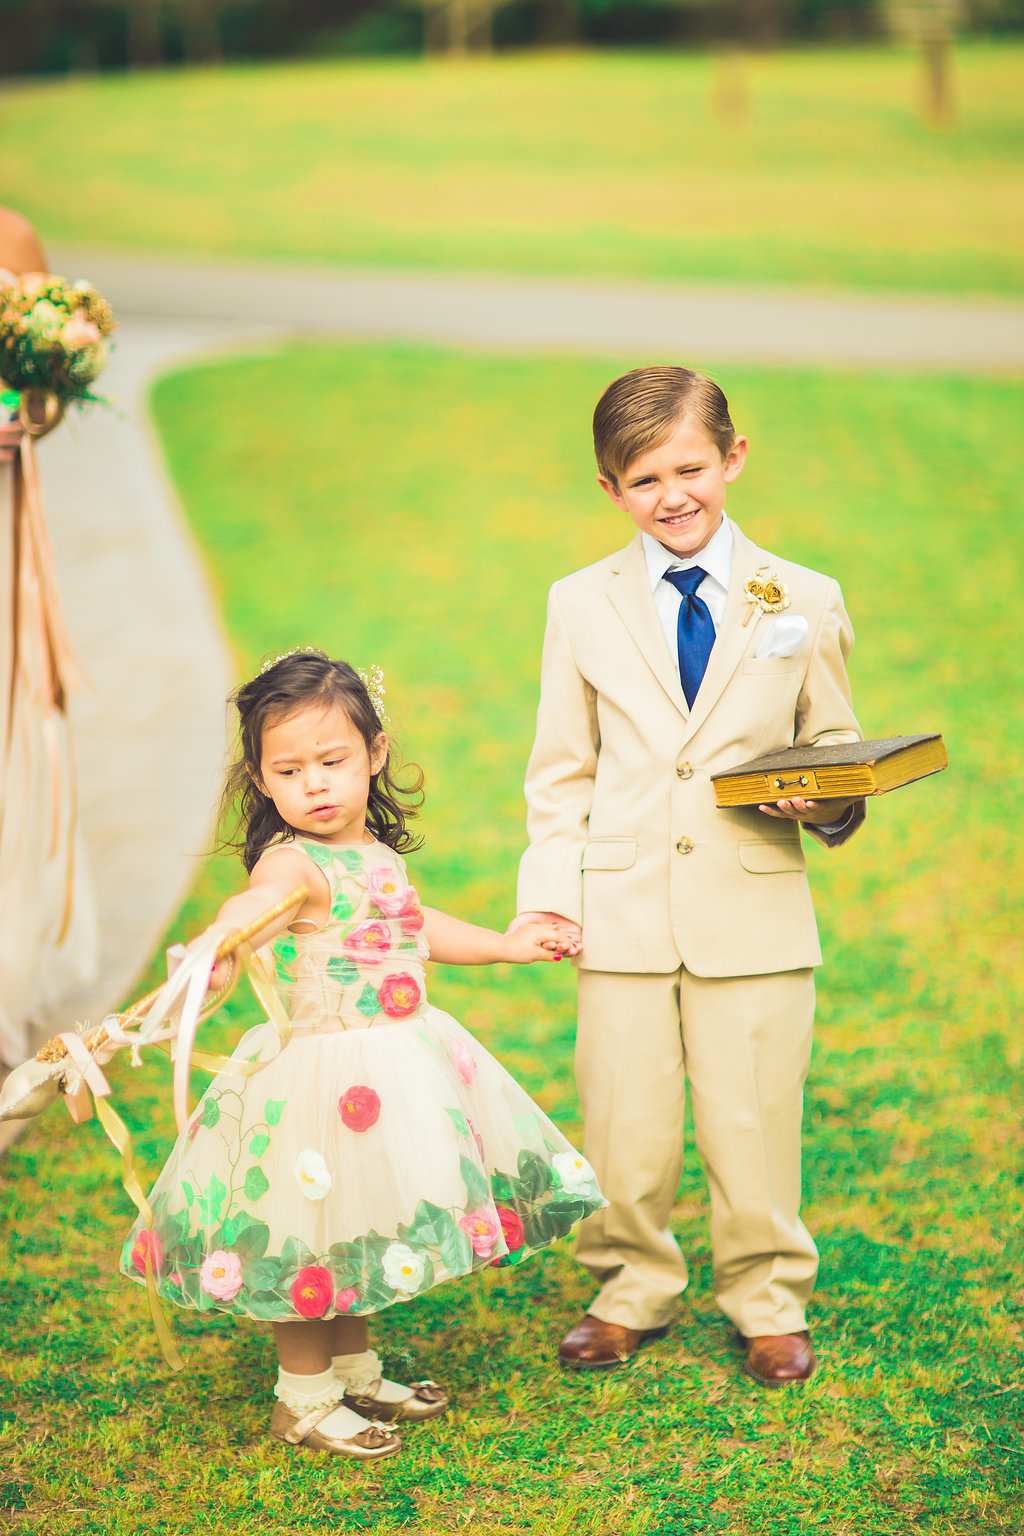 Wedding Photograph Of a Boy Holding a Book and a Little Girl Los Angeles